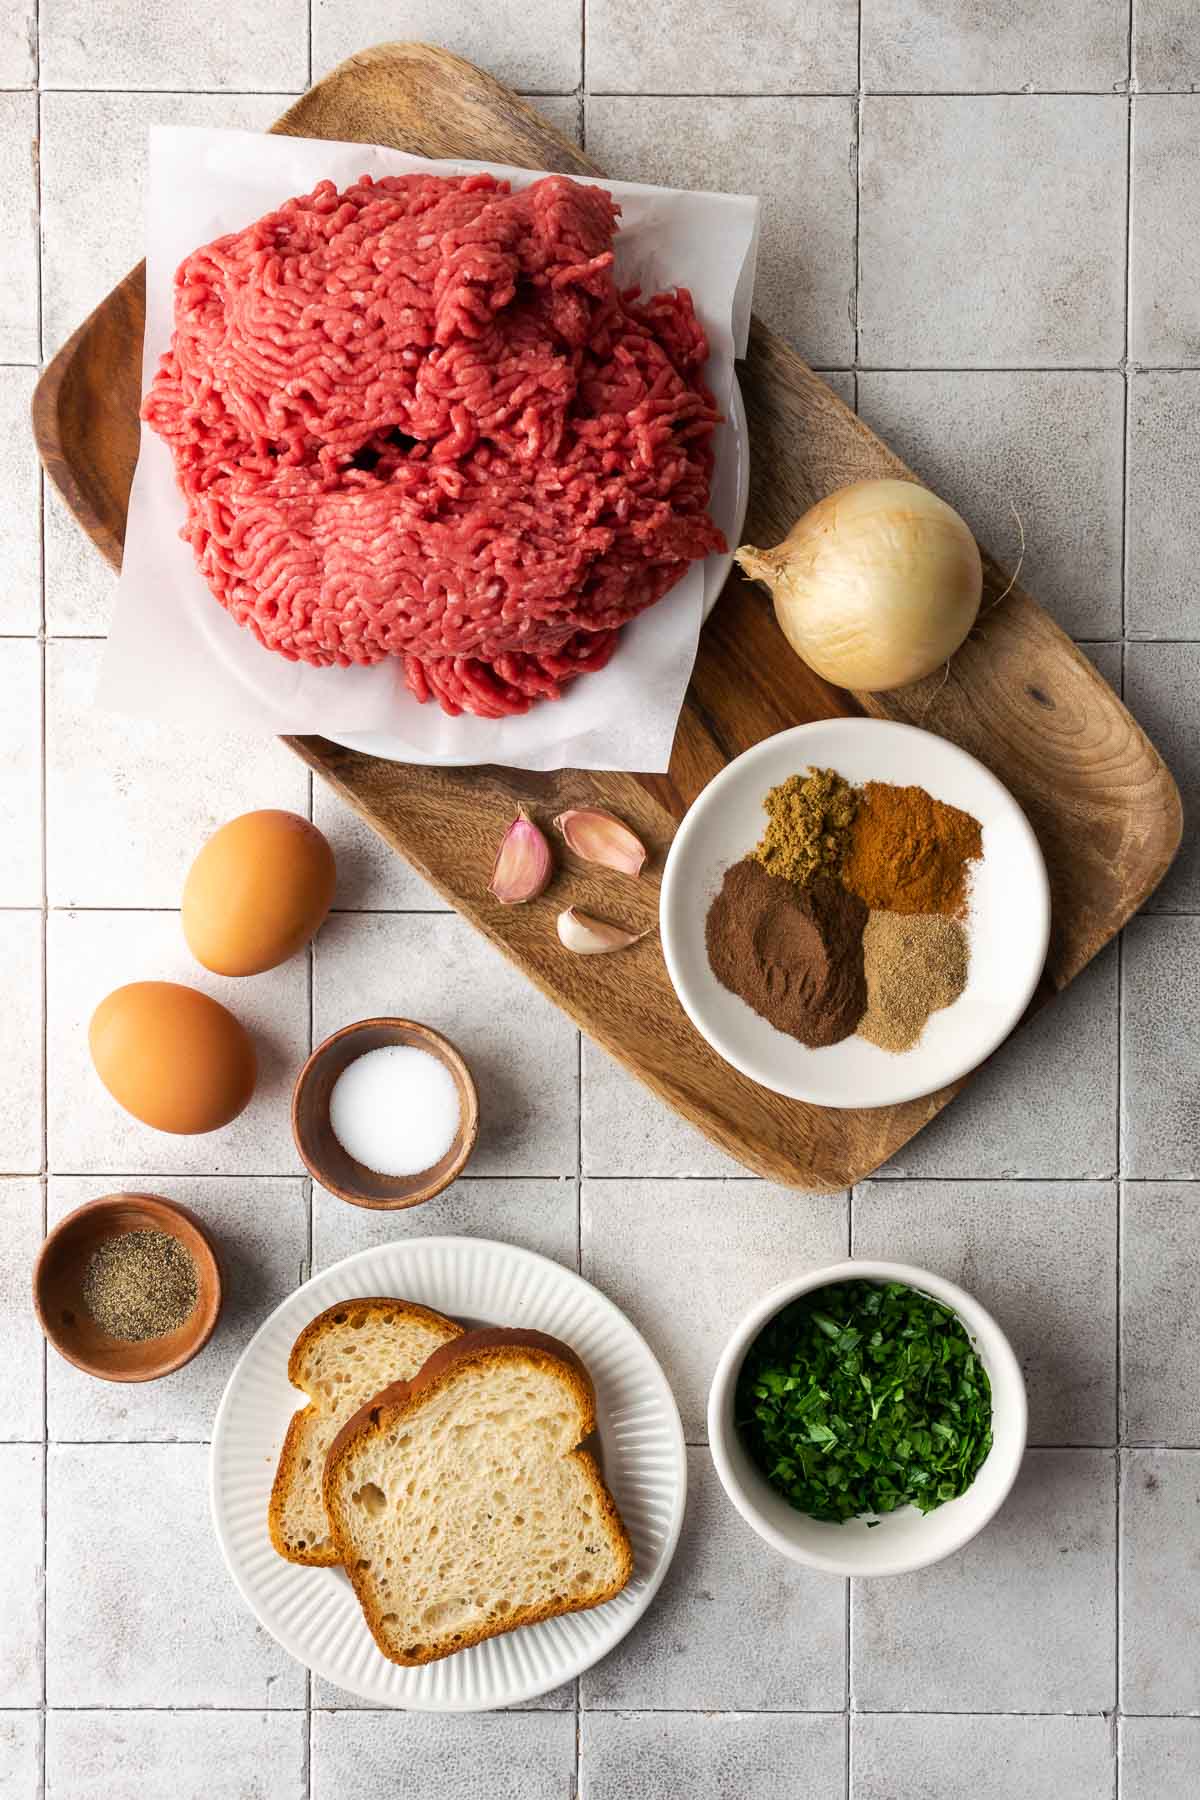 Ingredients for beef kofta displayed on a gray tile background.